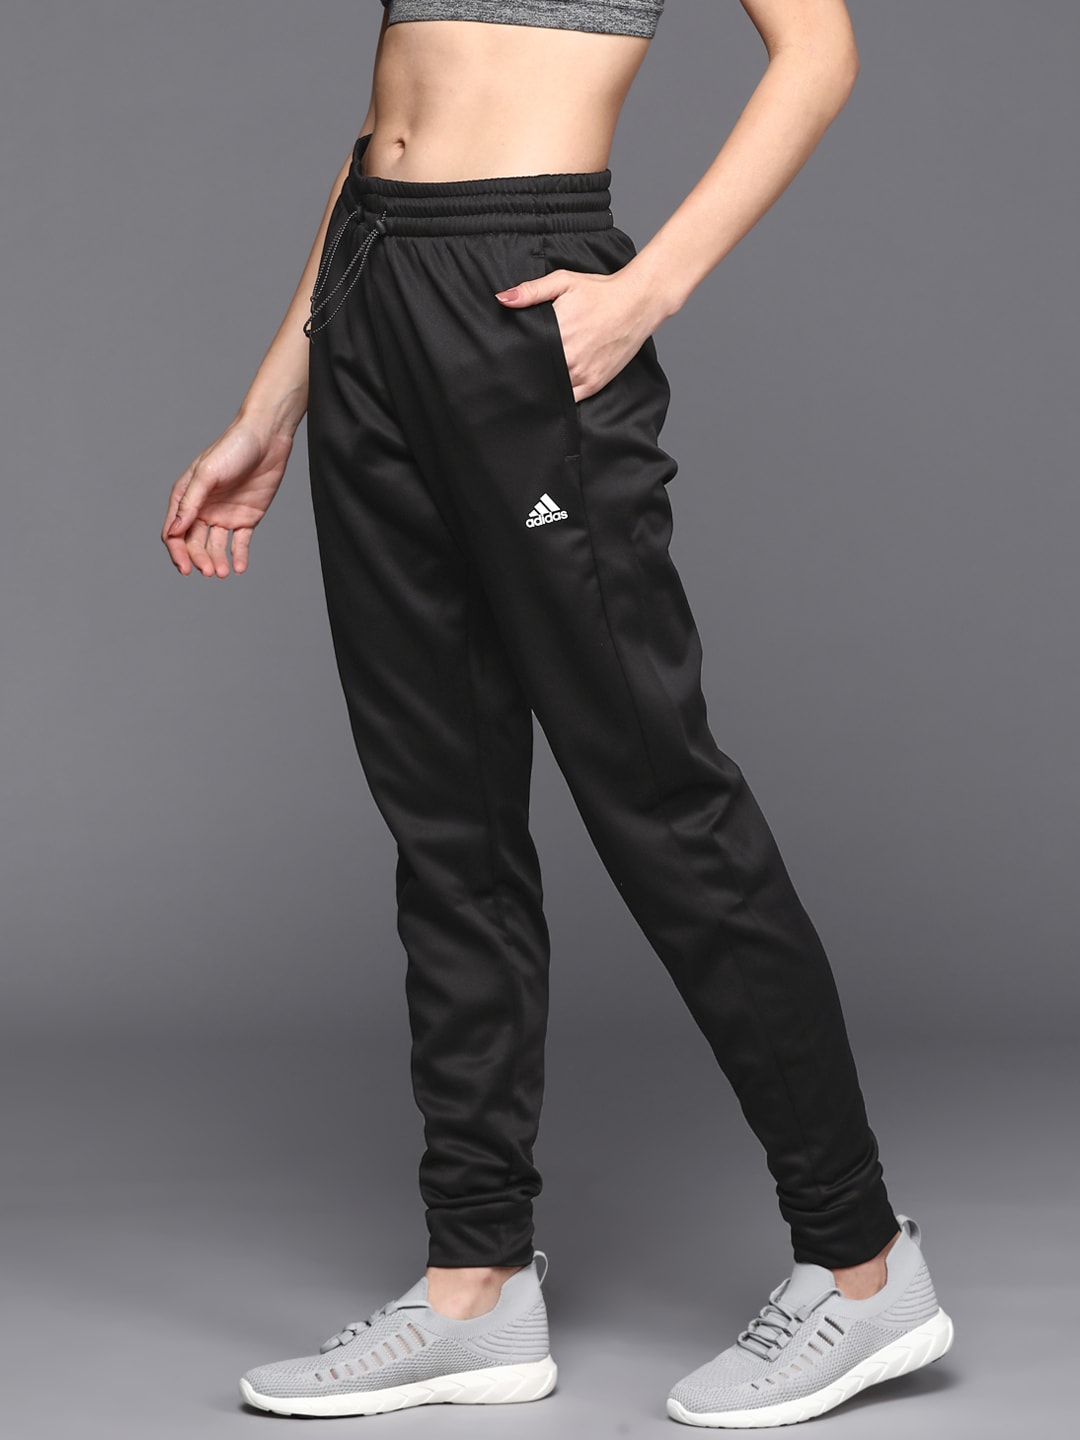 ADIDAS Women Black Solid GG Tap Track Pants Price in India